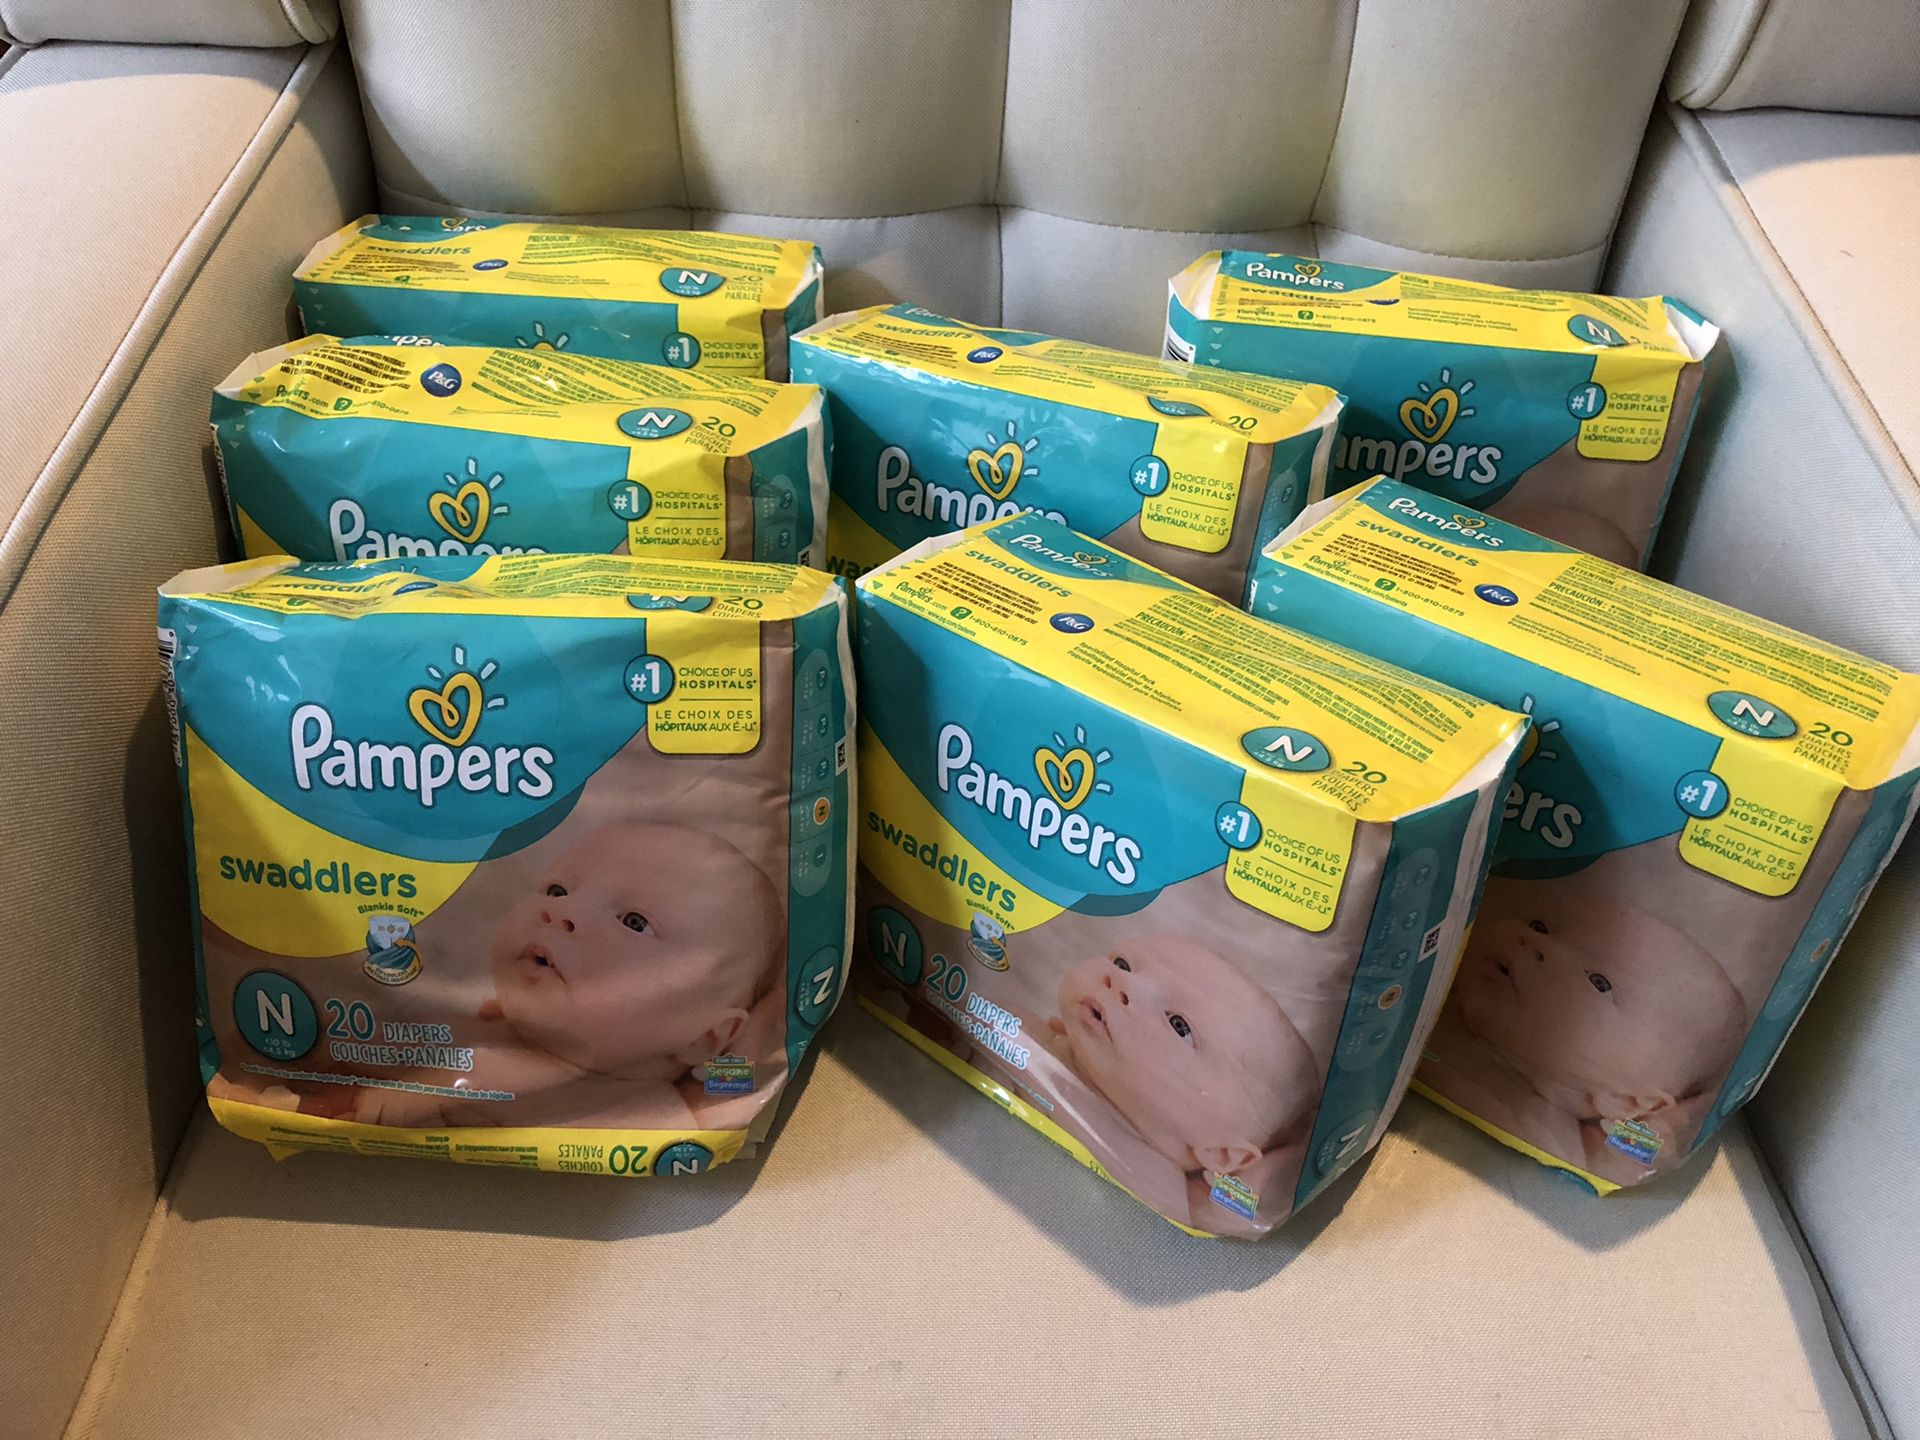 Pampers Swaddlers size newborn